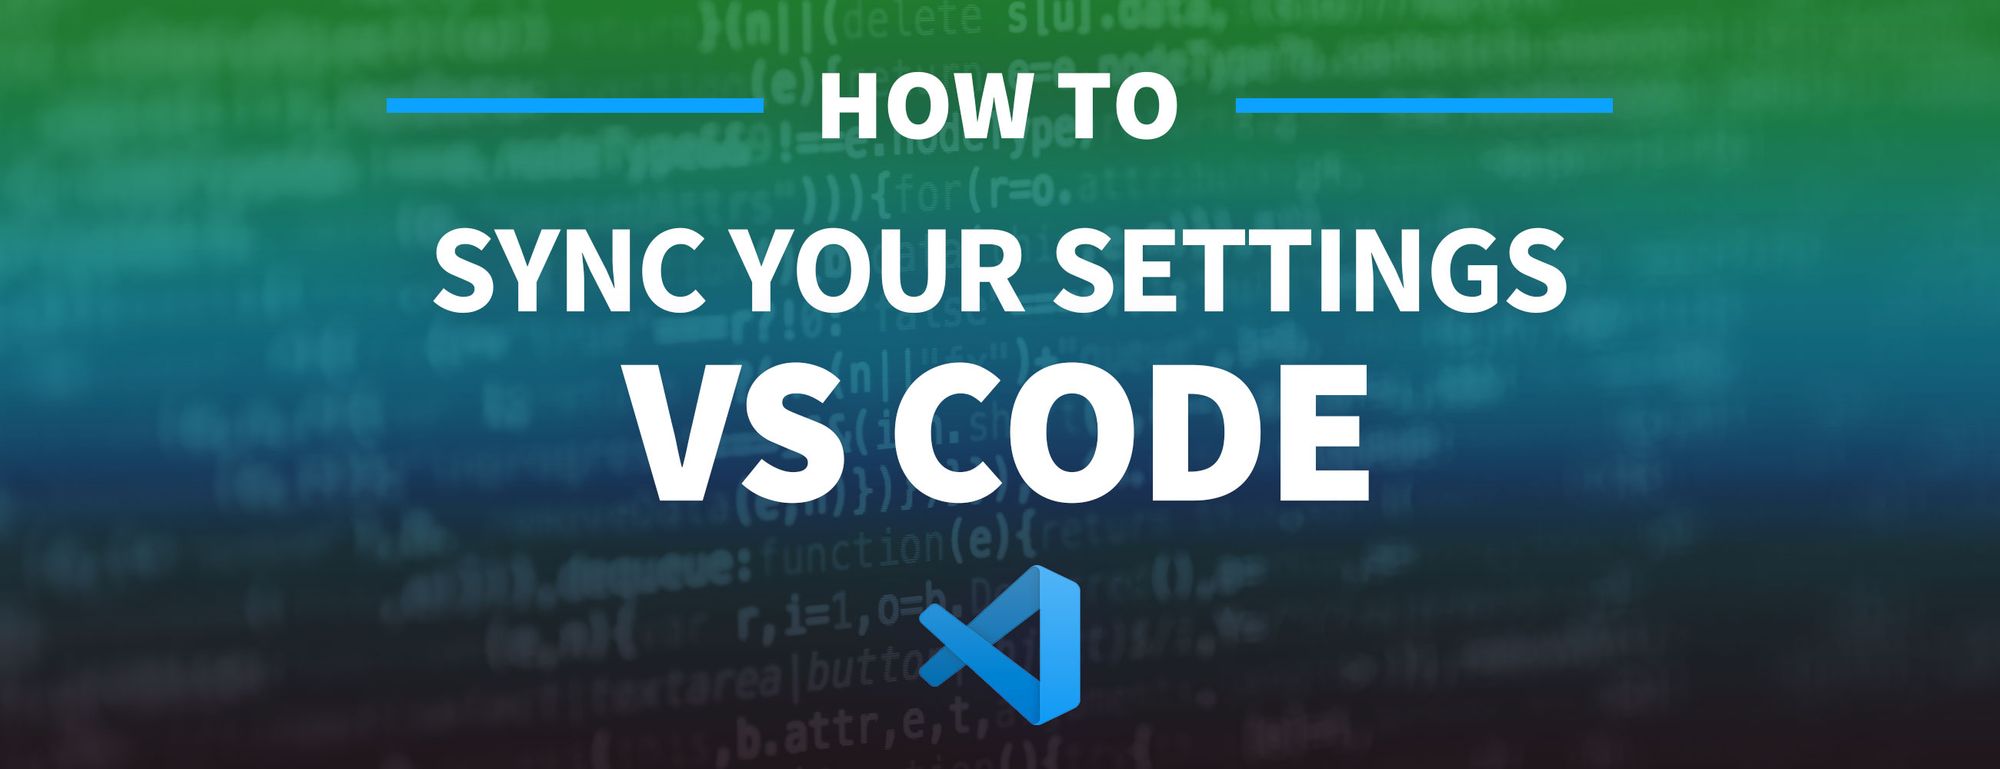 How to Sync VS Code Settings Between Multiple Devices and Environments